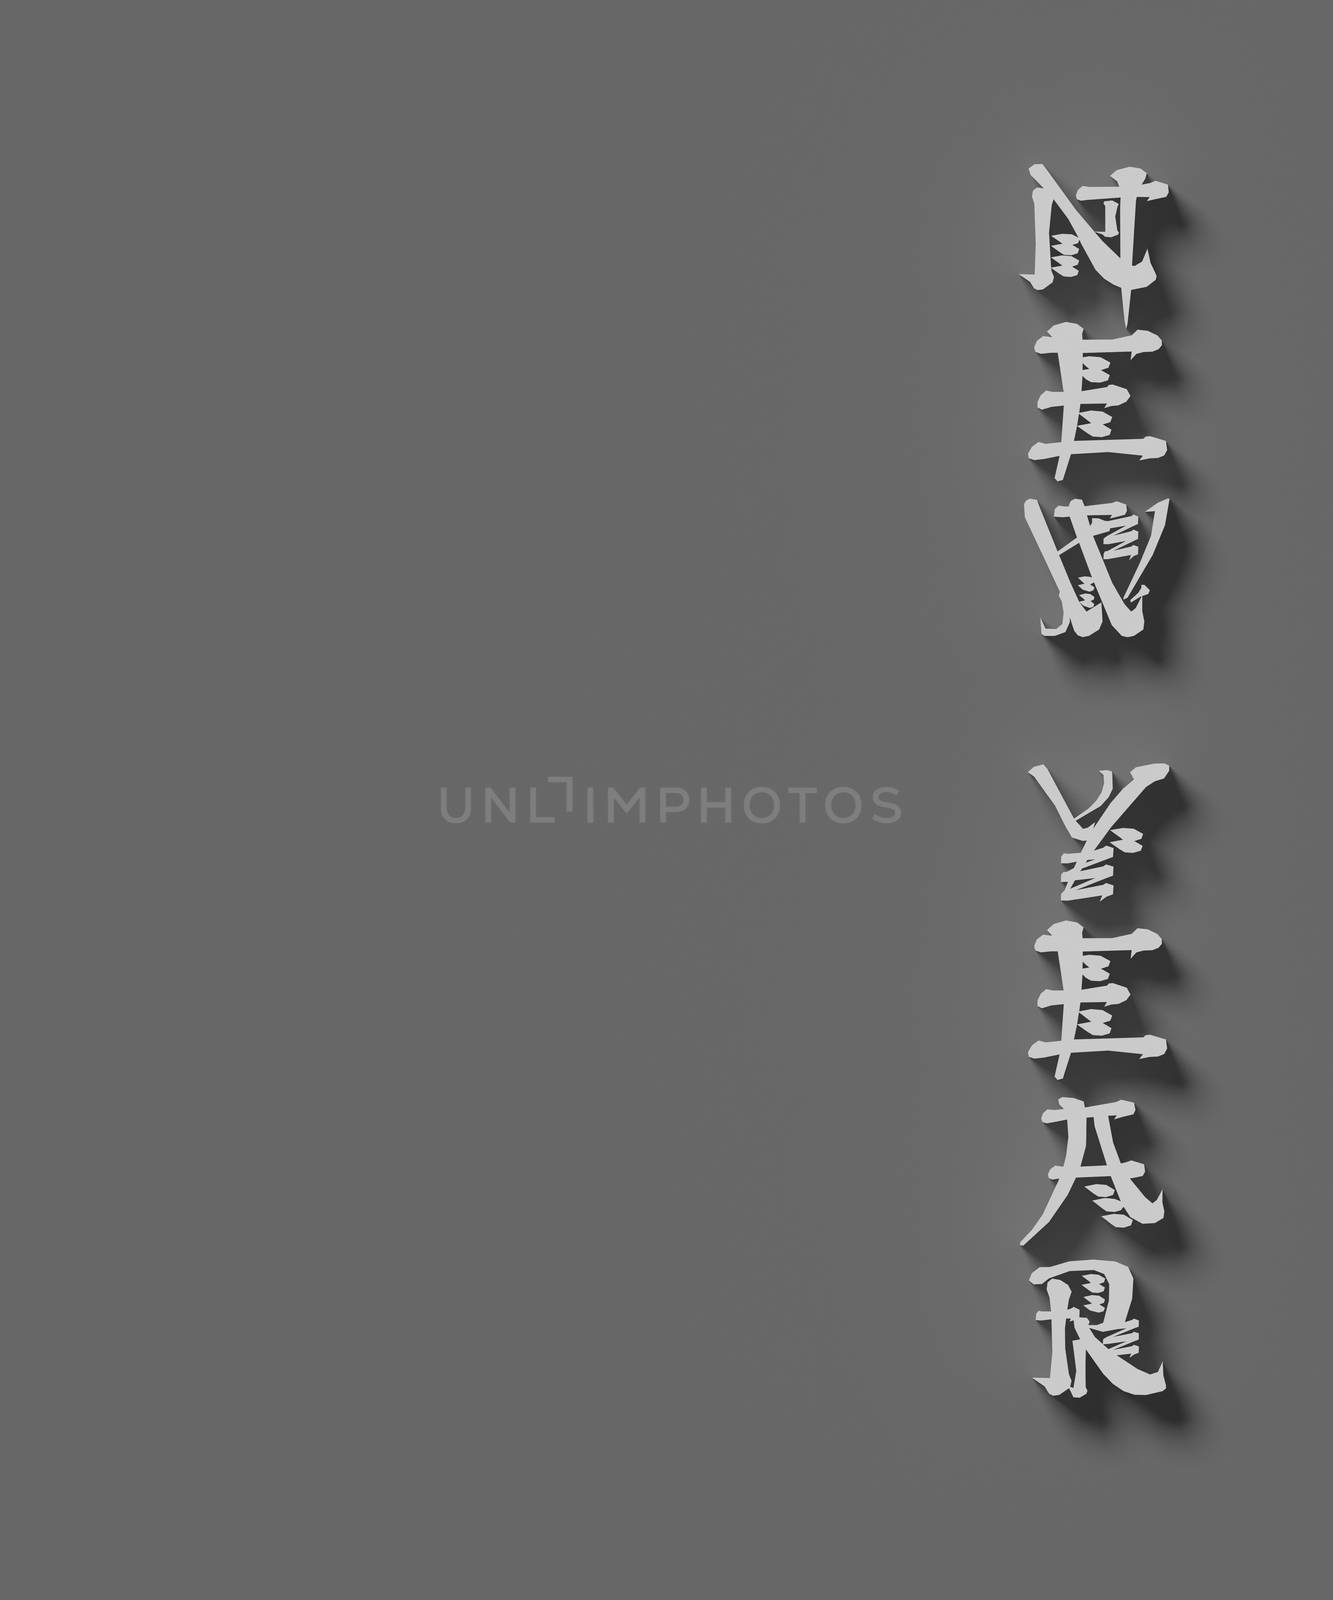 3D WORDS 'NEW YEAR' ON PLAIN BACKGROUND by PrettyTG